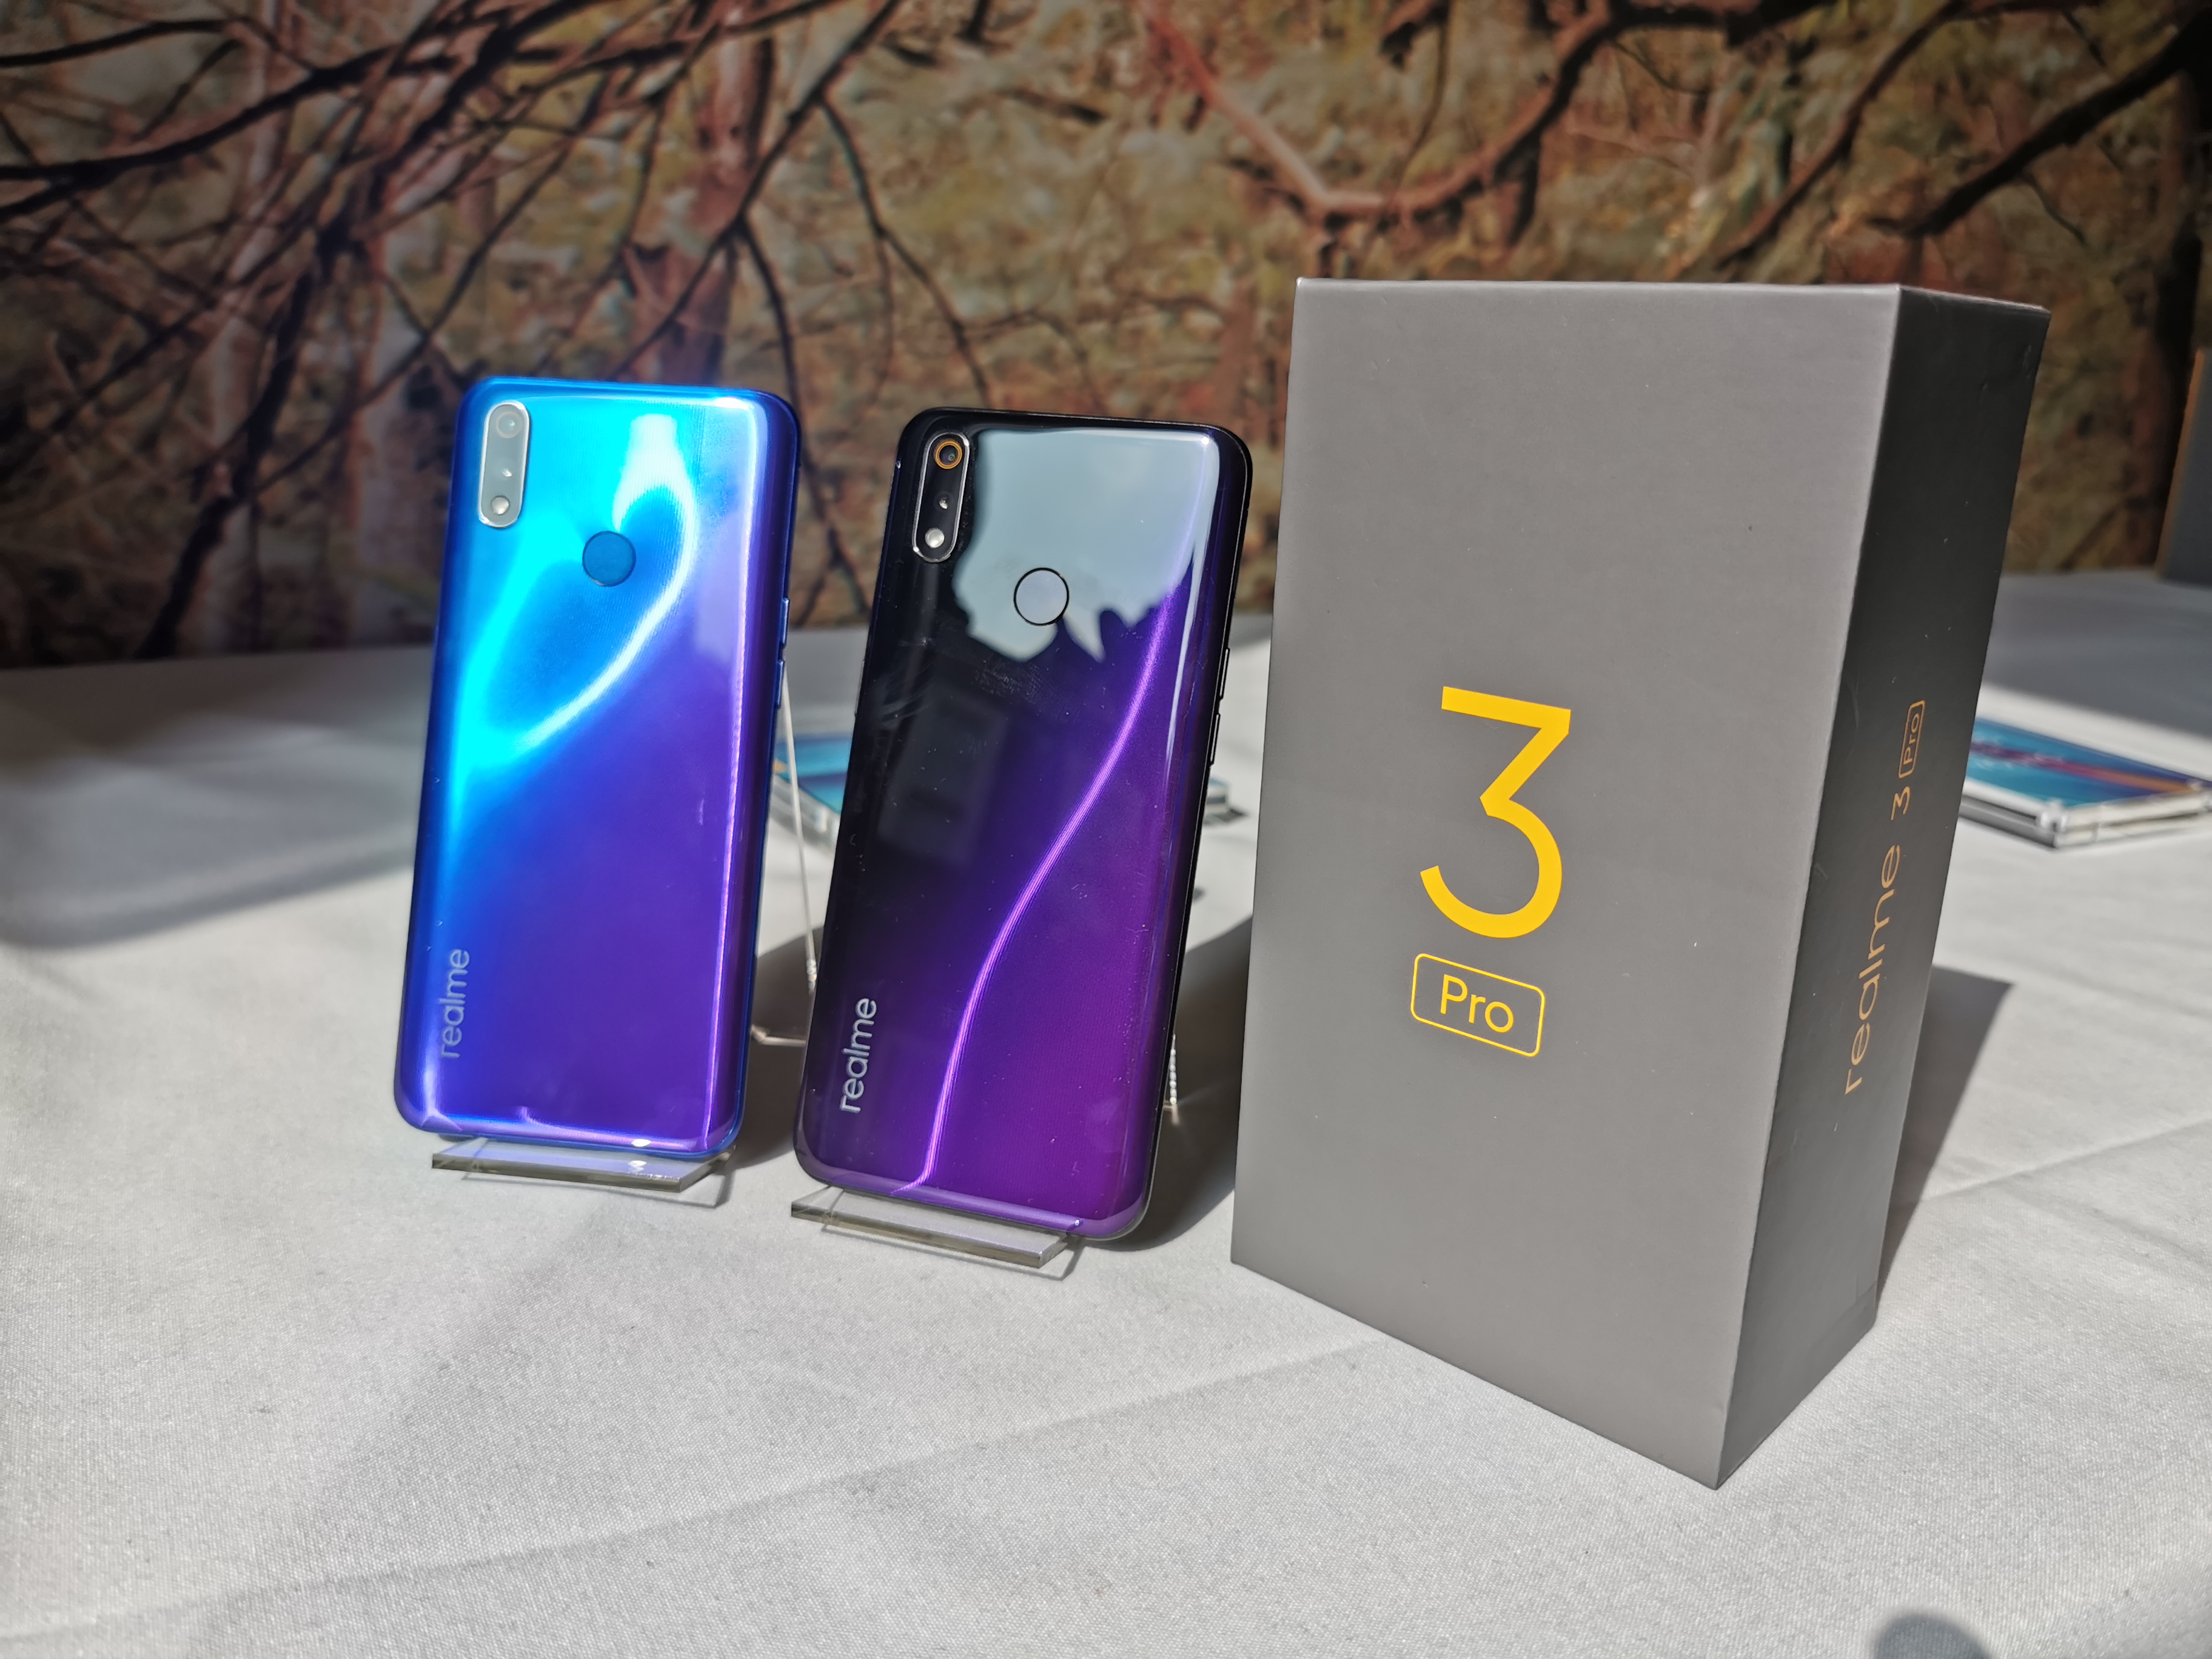 Realme to launch 1st ever 5G smartphones in 2019